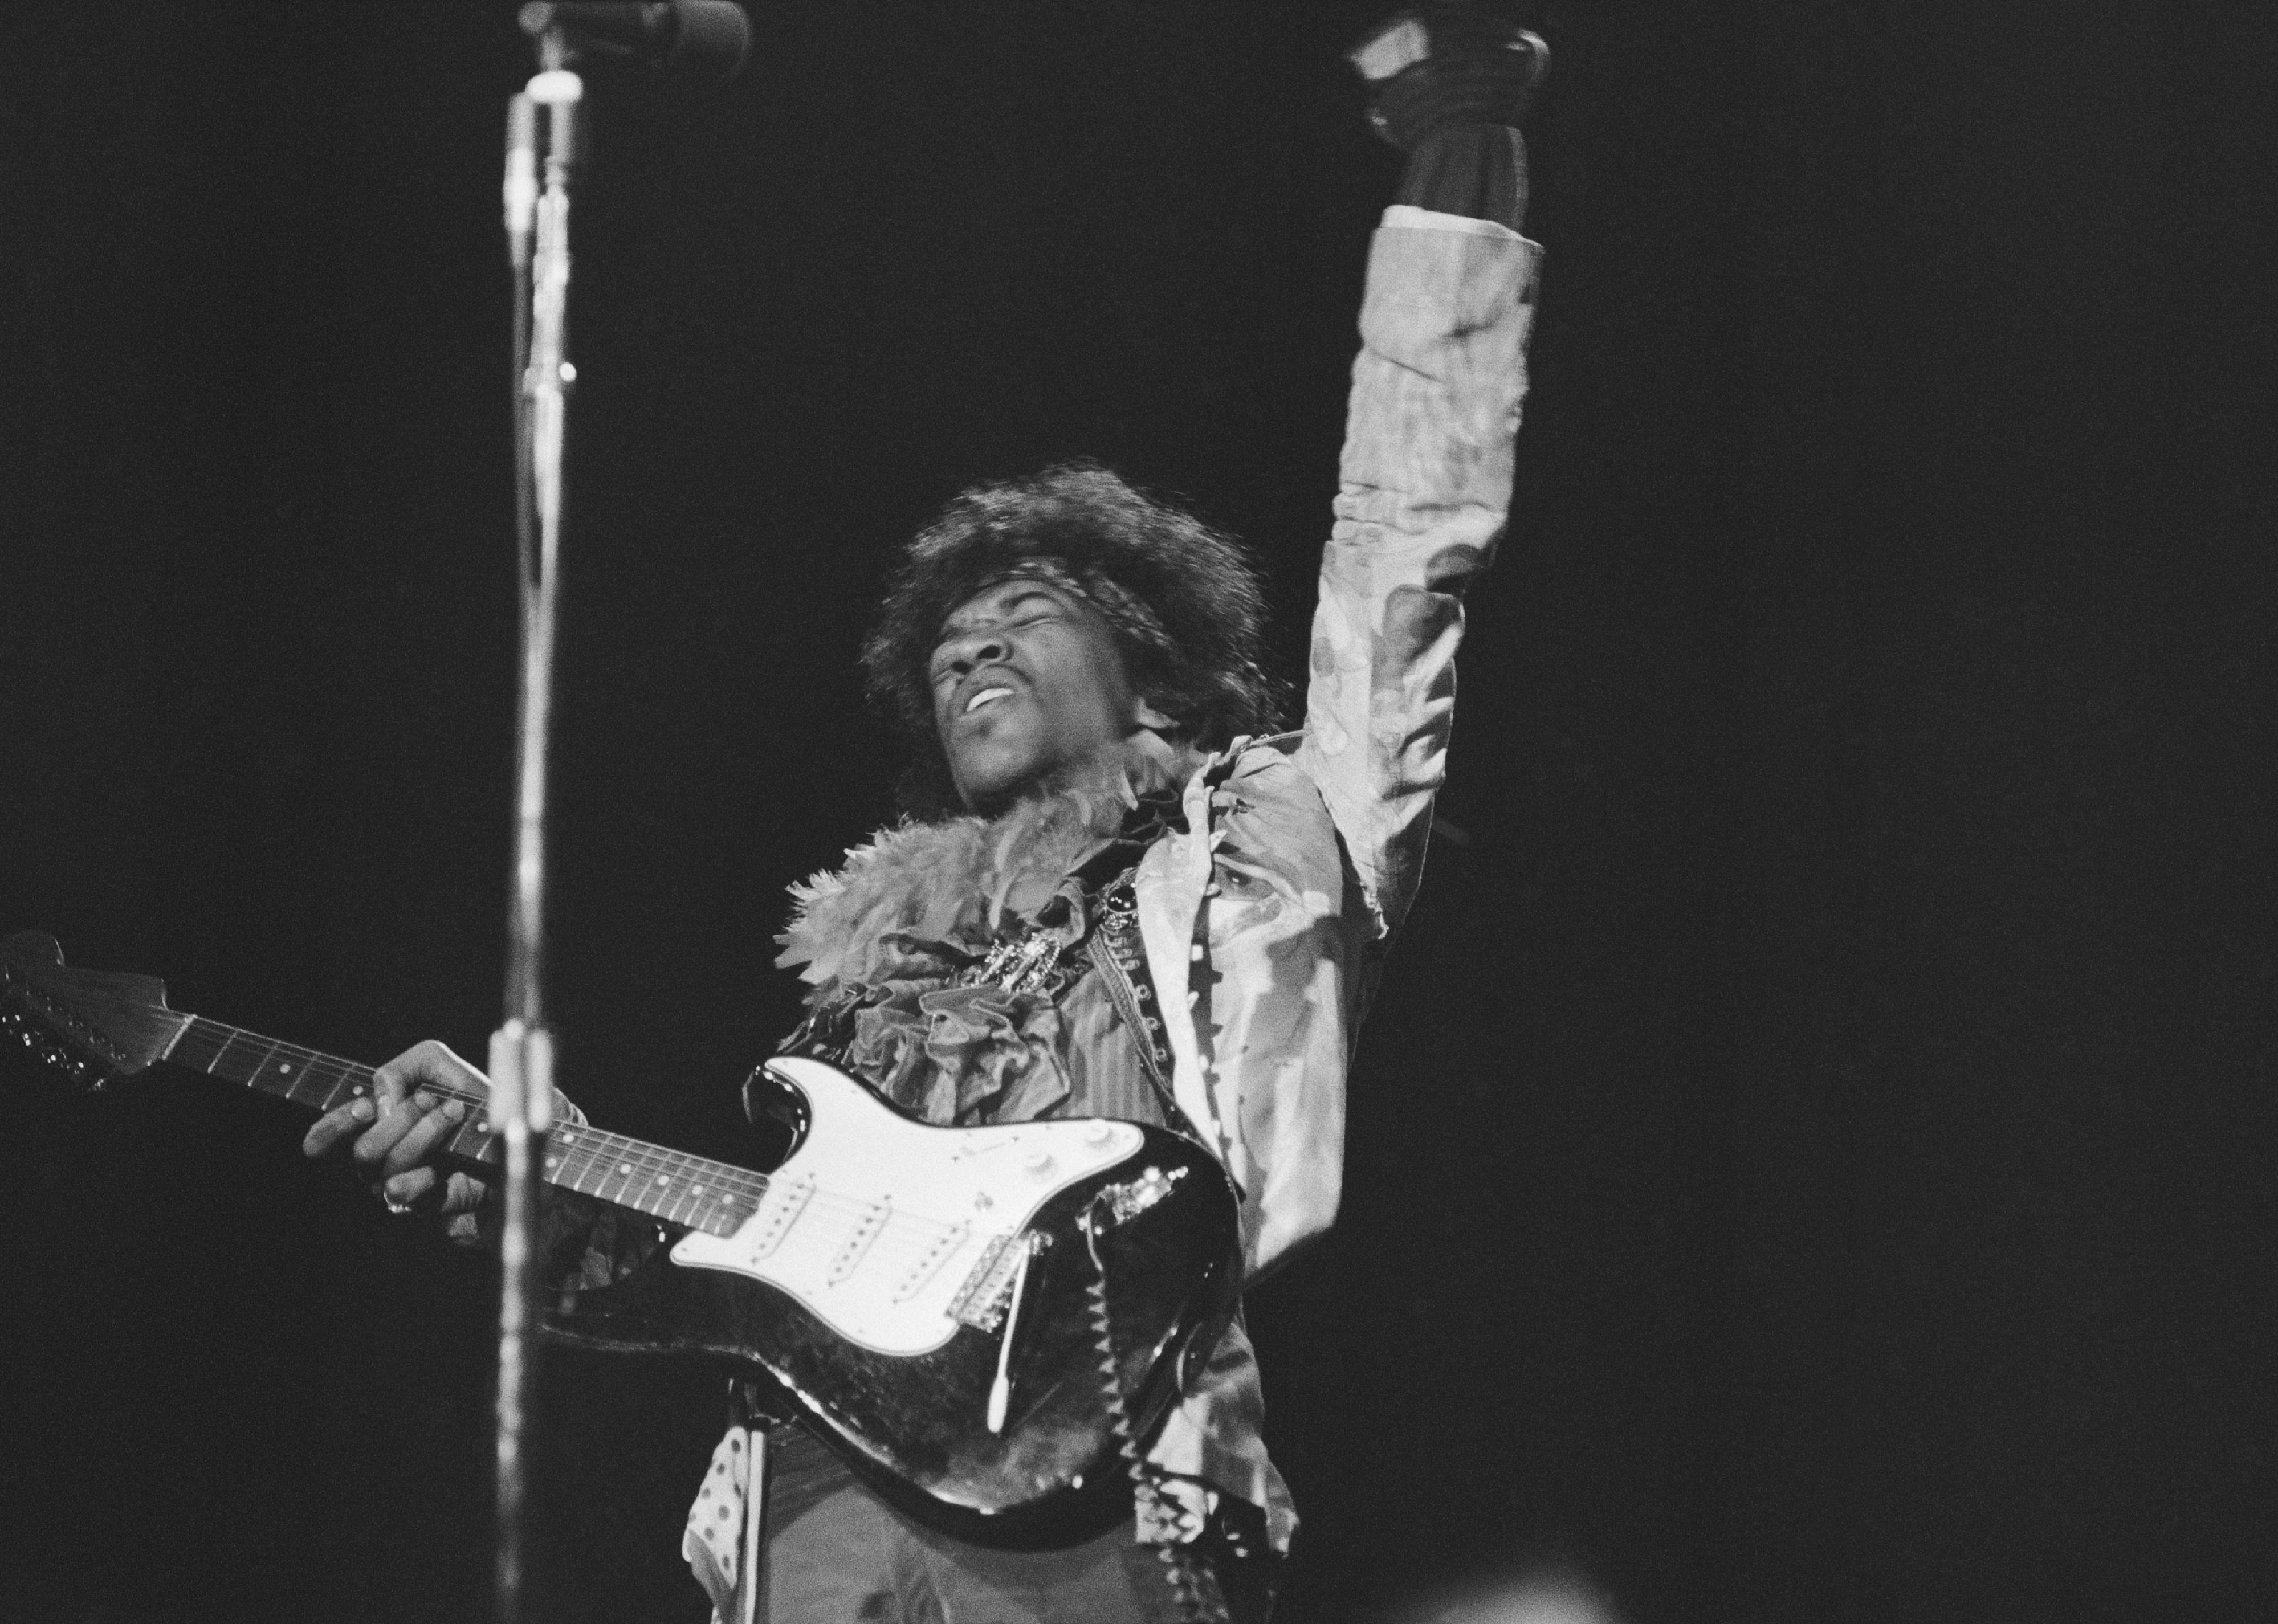 Jimi Hendrix performs onstage at the Monterey Pop Festival.